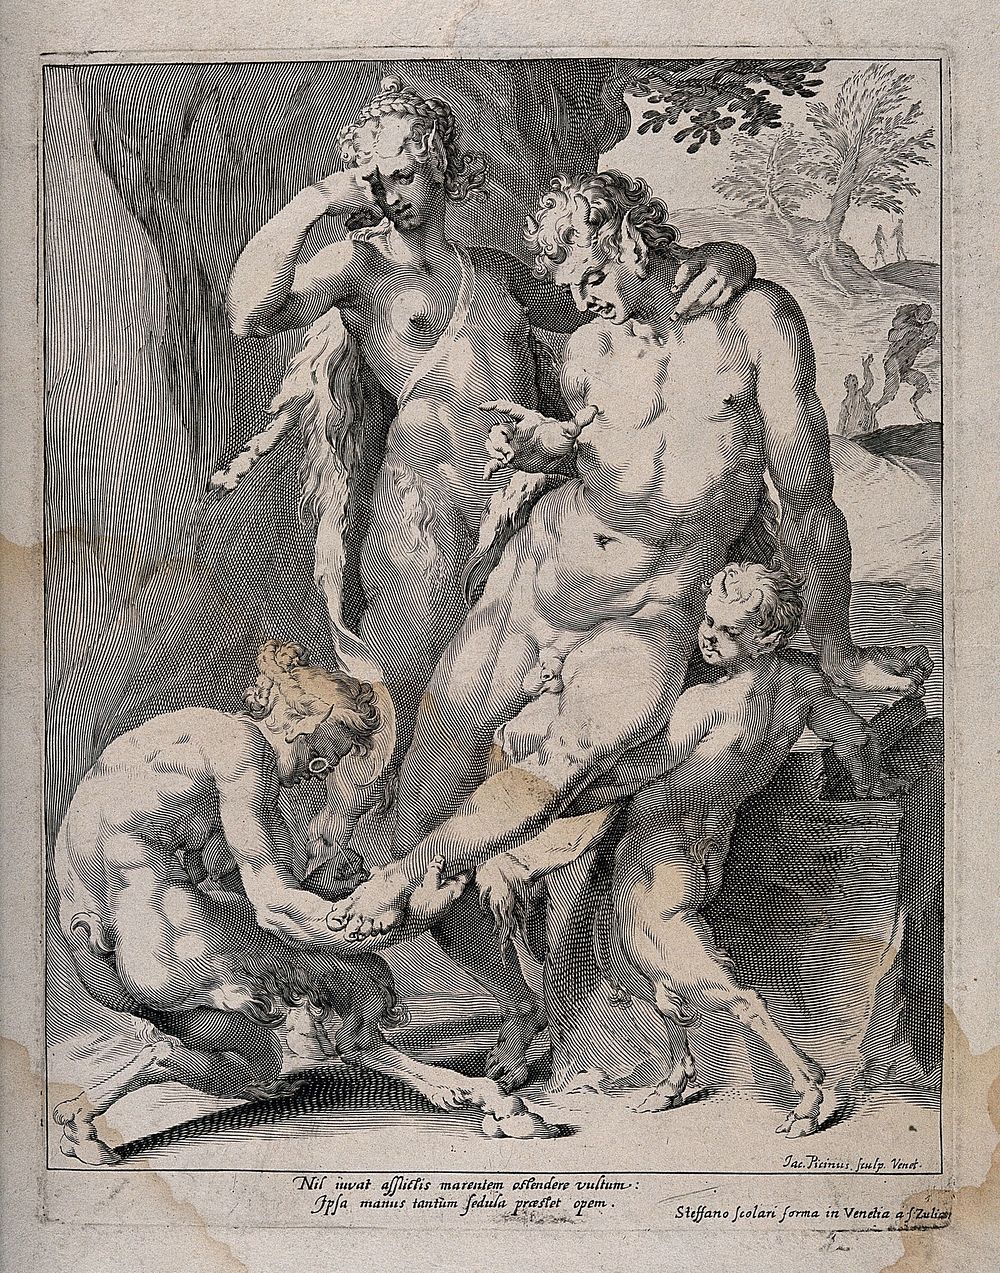 A satyr wearing eyeglasses, with young assistant, removes a thorn from the foot of a male faun who leans against female…